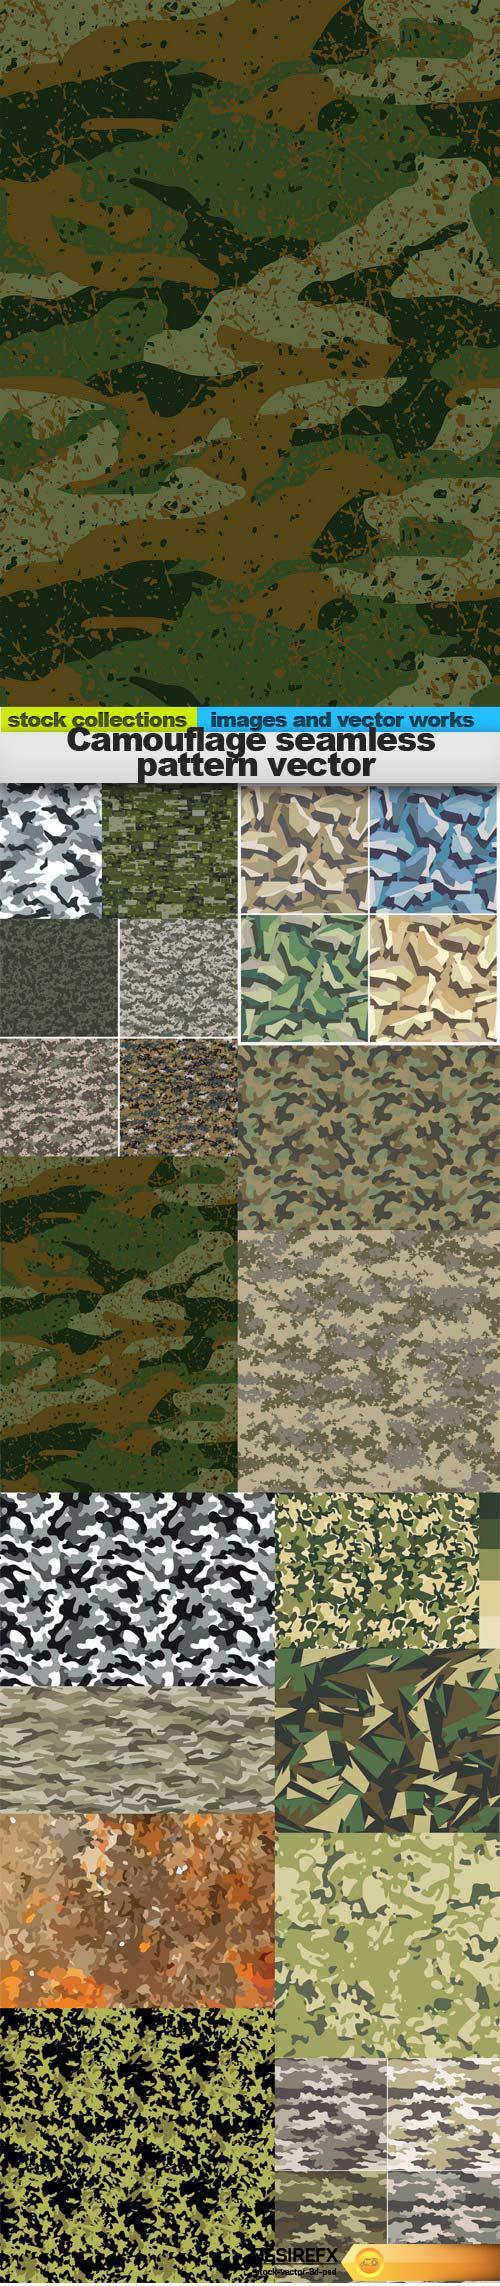 Camouflage seamless pattern vector, 15 x EPS